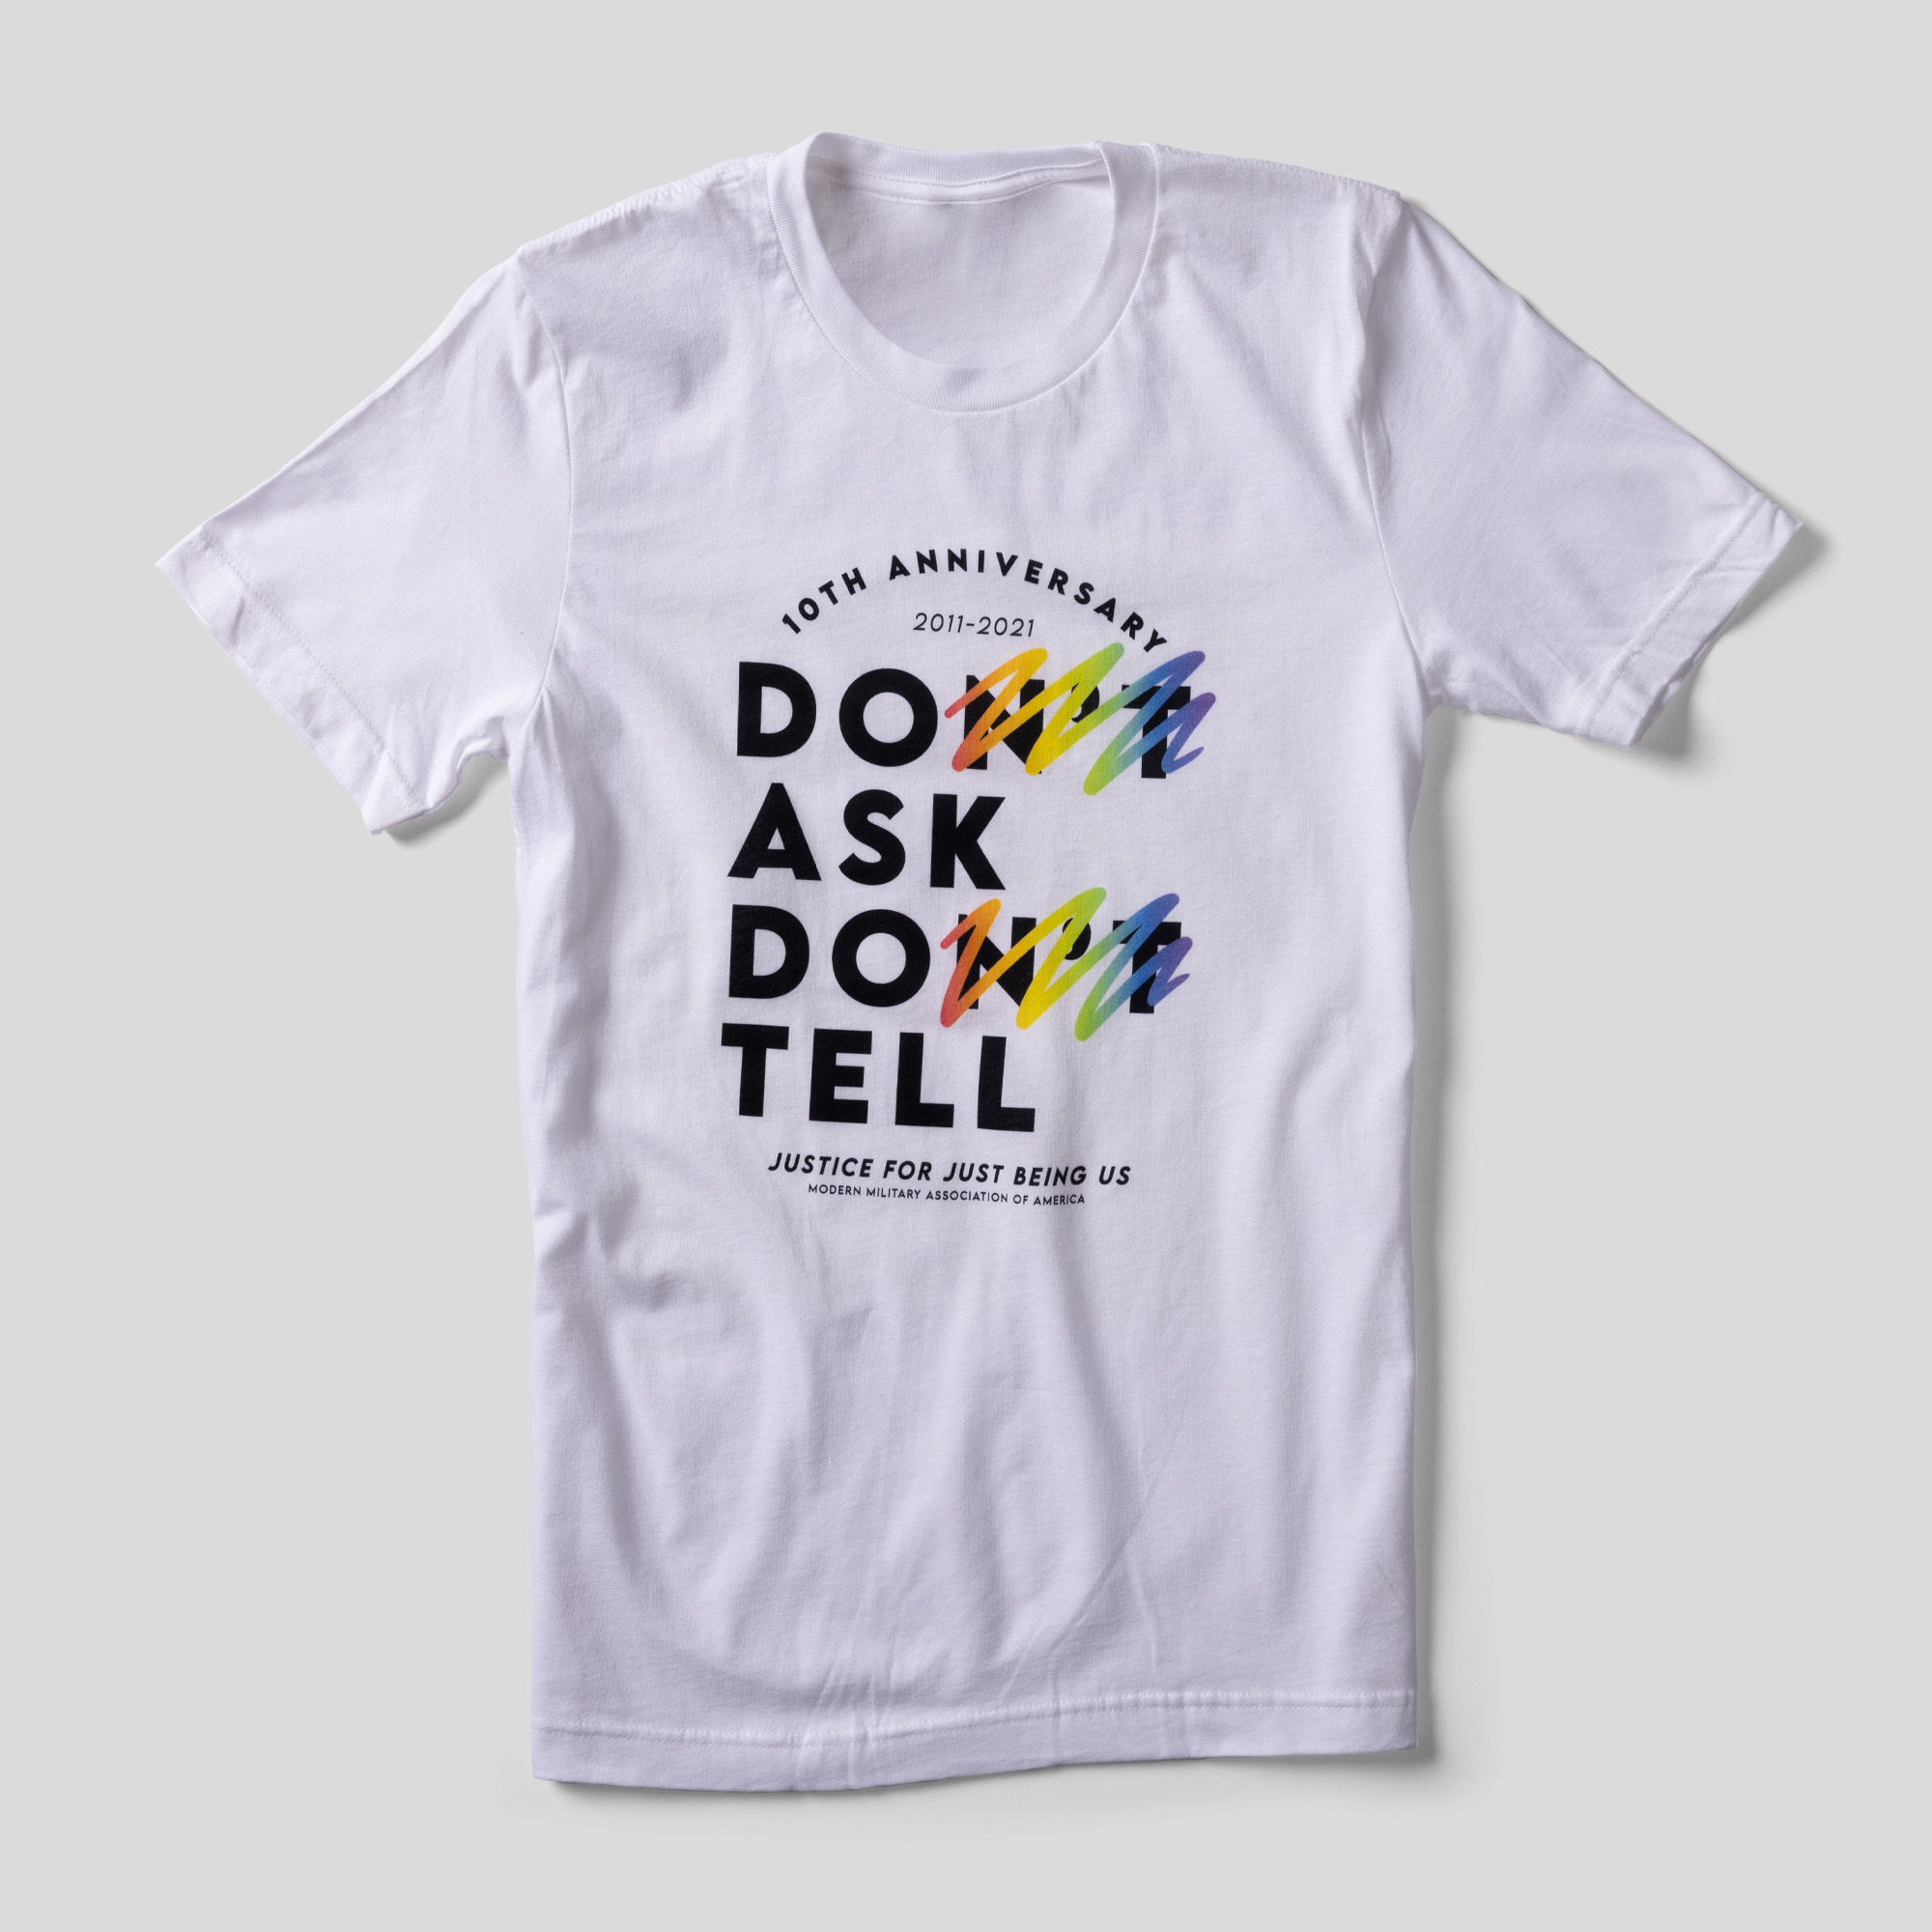 A white t-shirt that reads 10th Anniversary 2011-2021 Don't Ask Don't Tell Justice for Just Being Us. The "n't" parts of "Don't" are crossed out in rainbow scribbles.